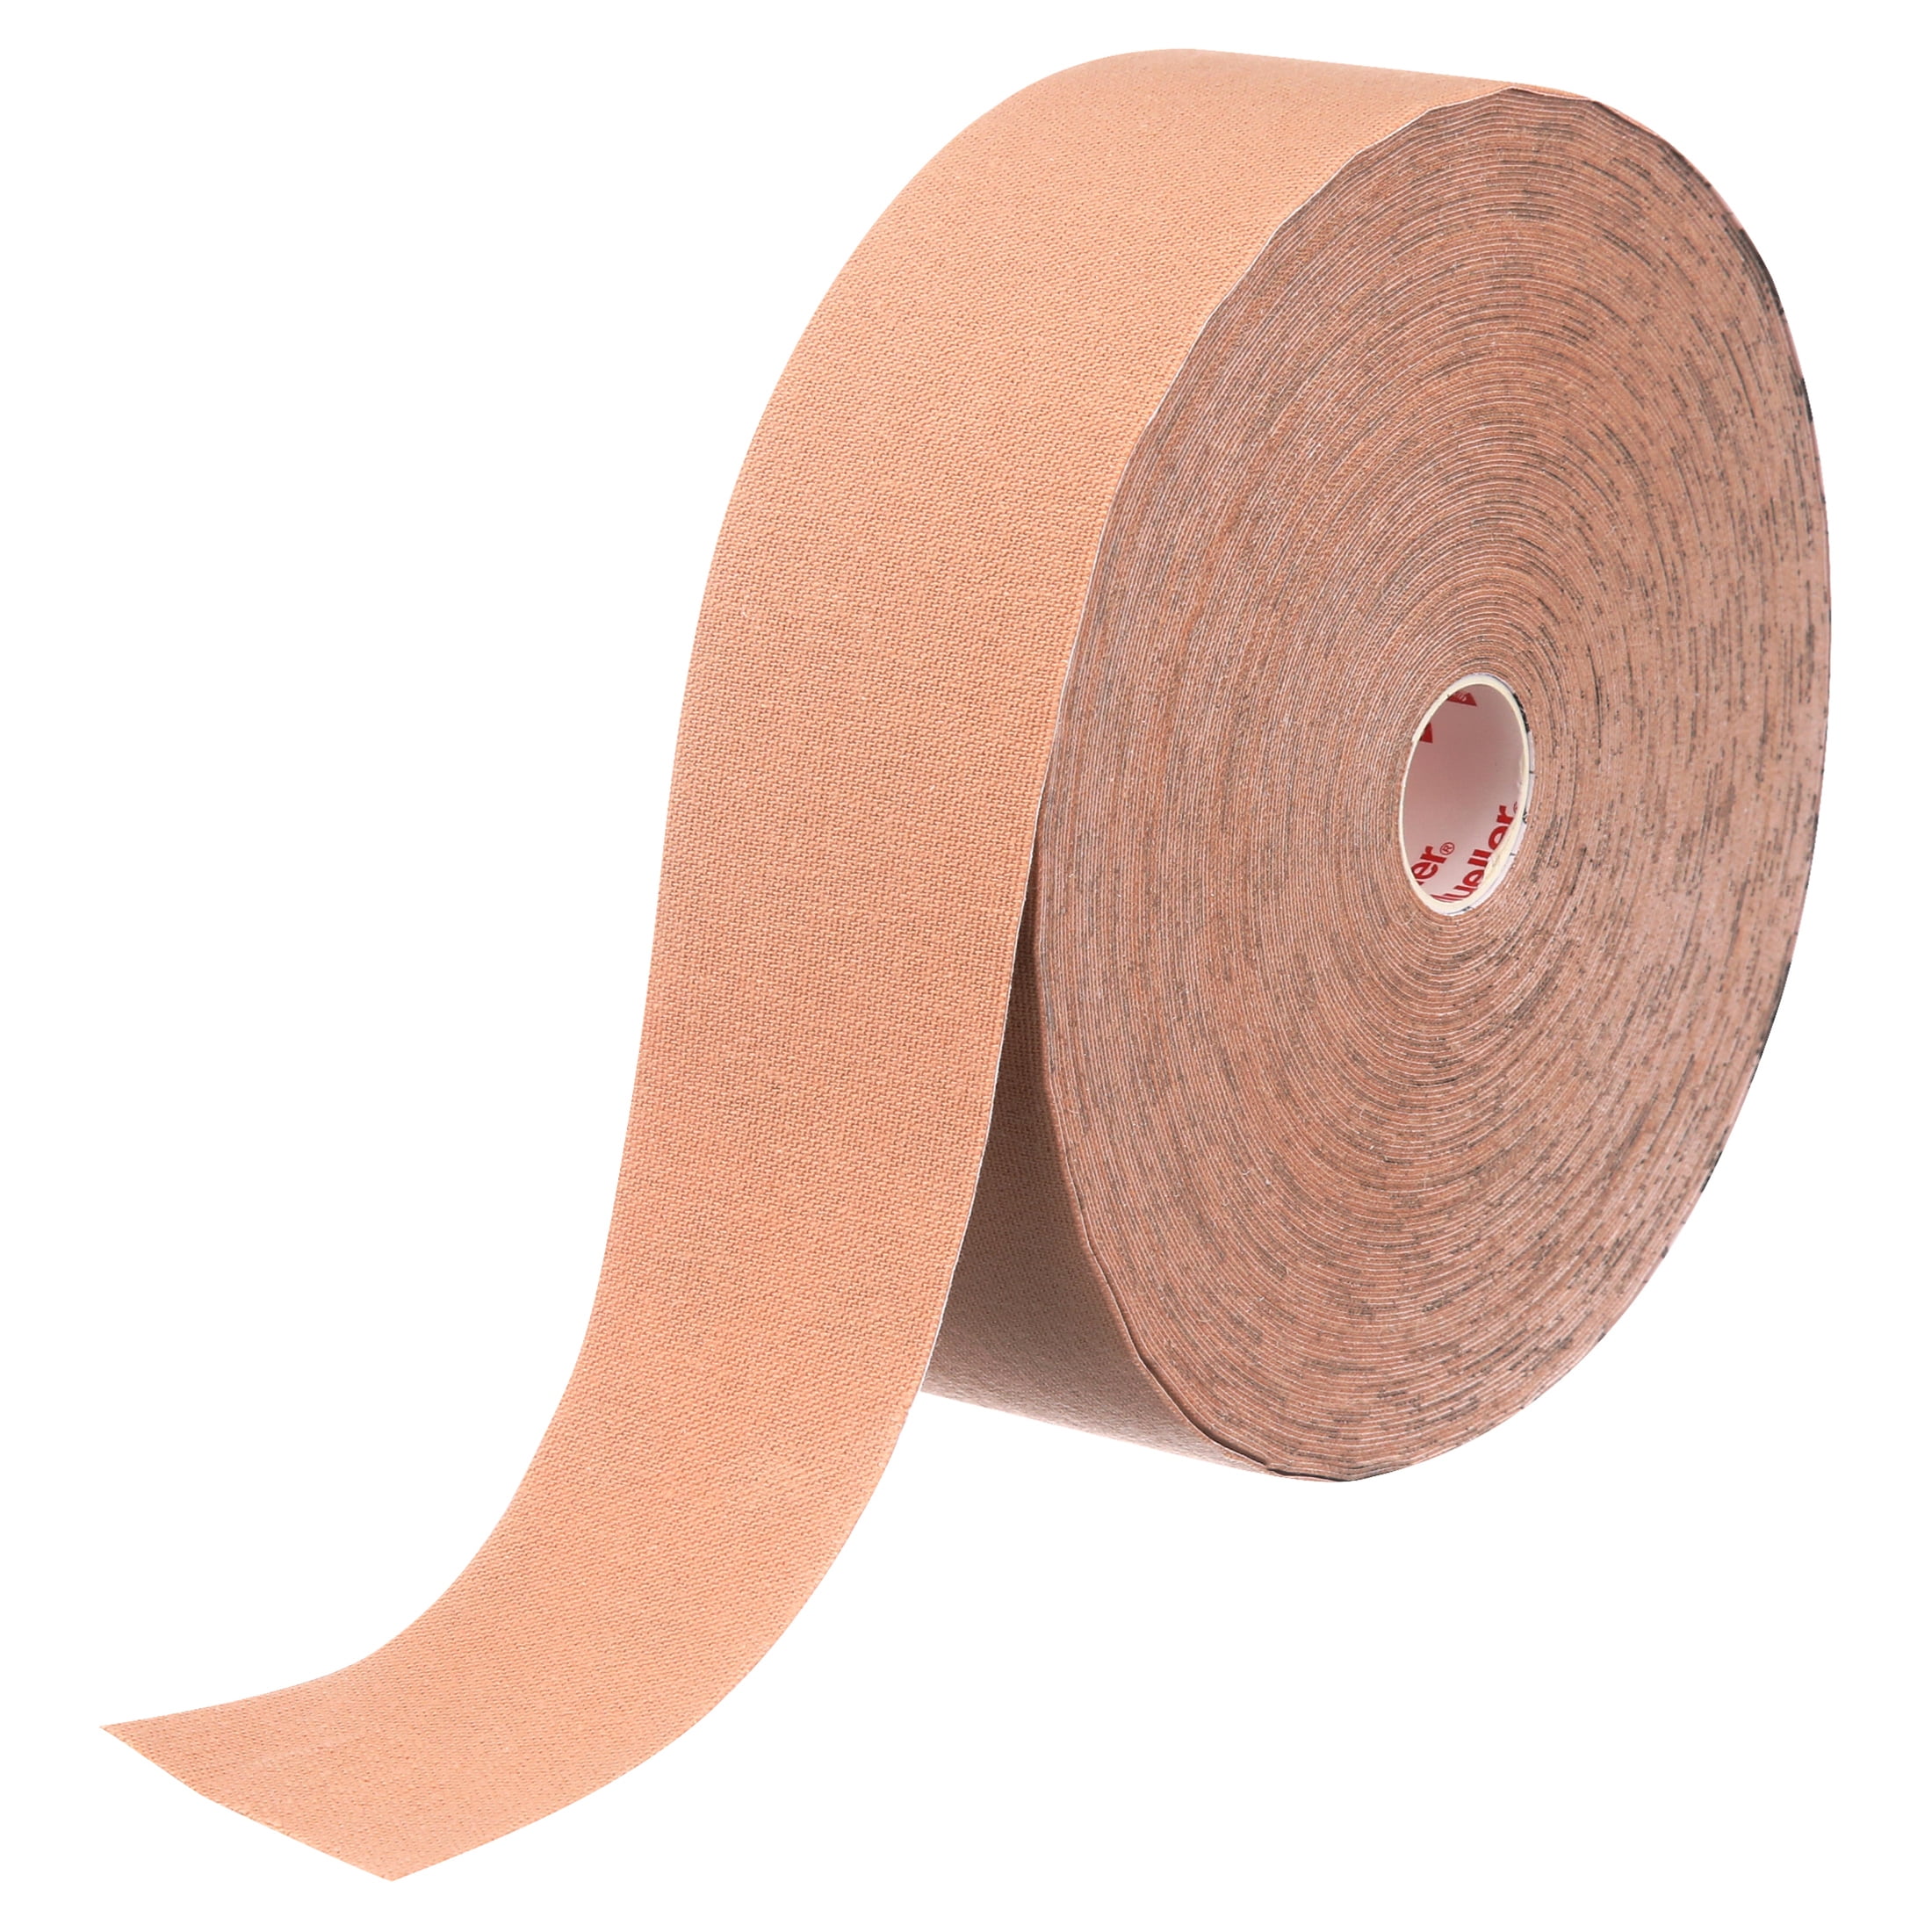 TheraBand Kinesiology Tape, Bulk Roll - 2 in. x 103.3' ft. Roll -  Beige/Beige [081664184] - $90.46 : PT United, Add Physical Therapy Products  To Your Practice